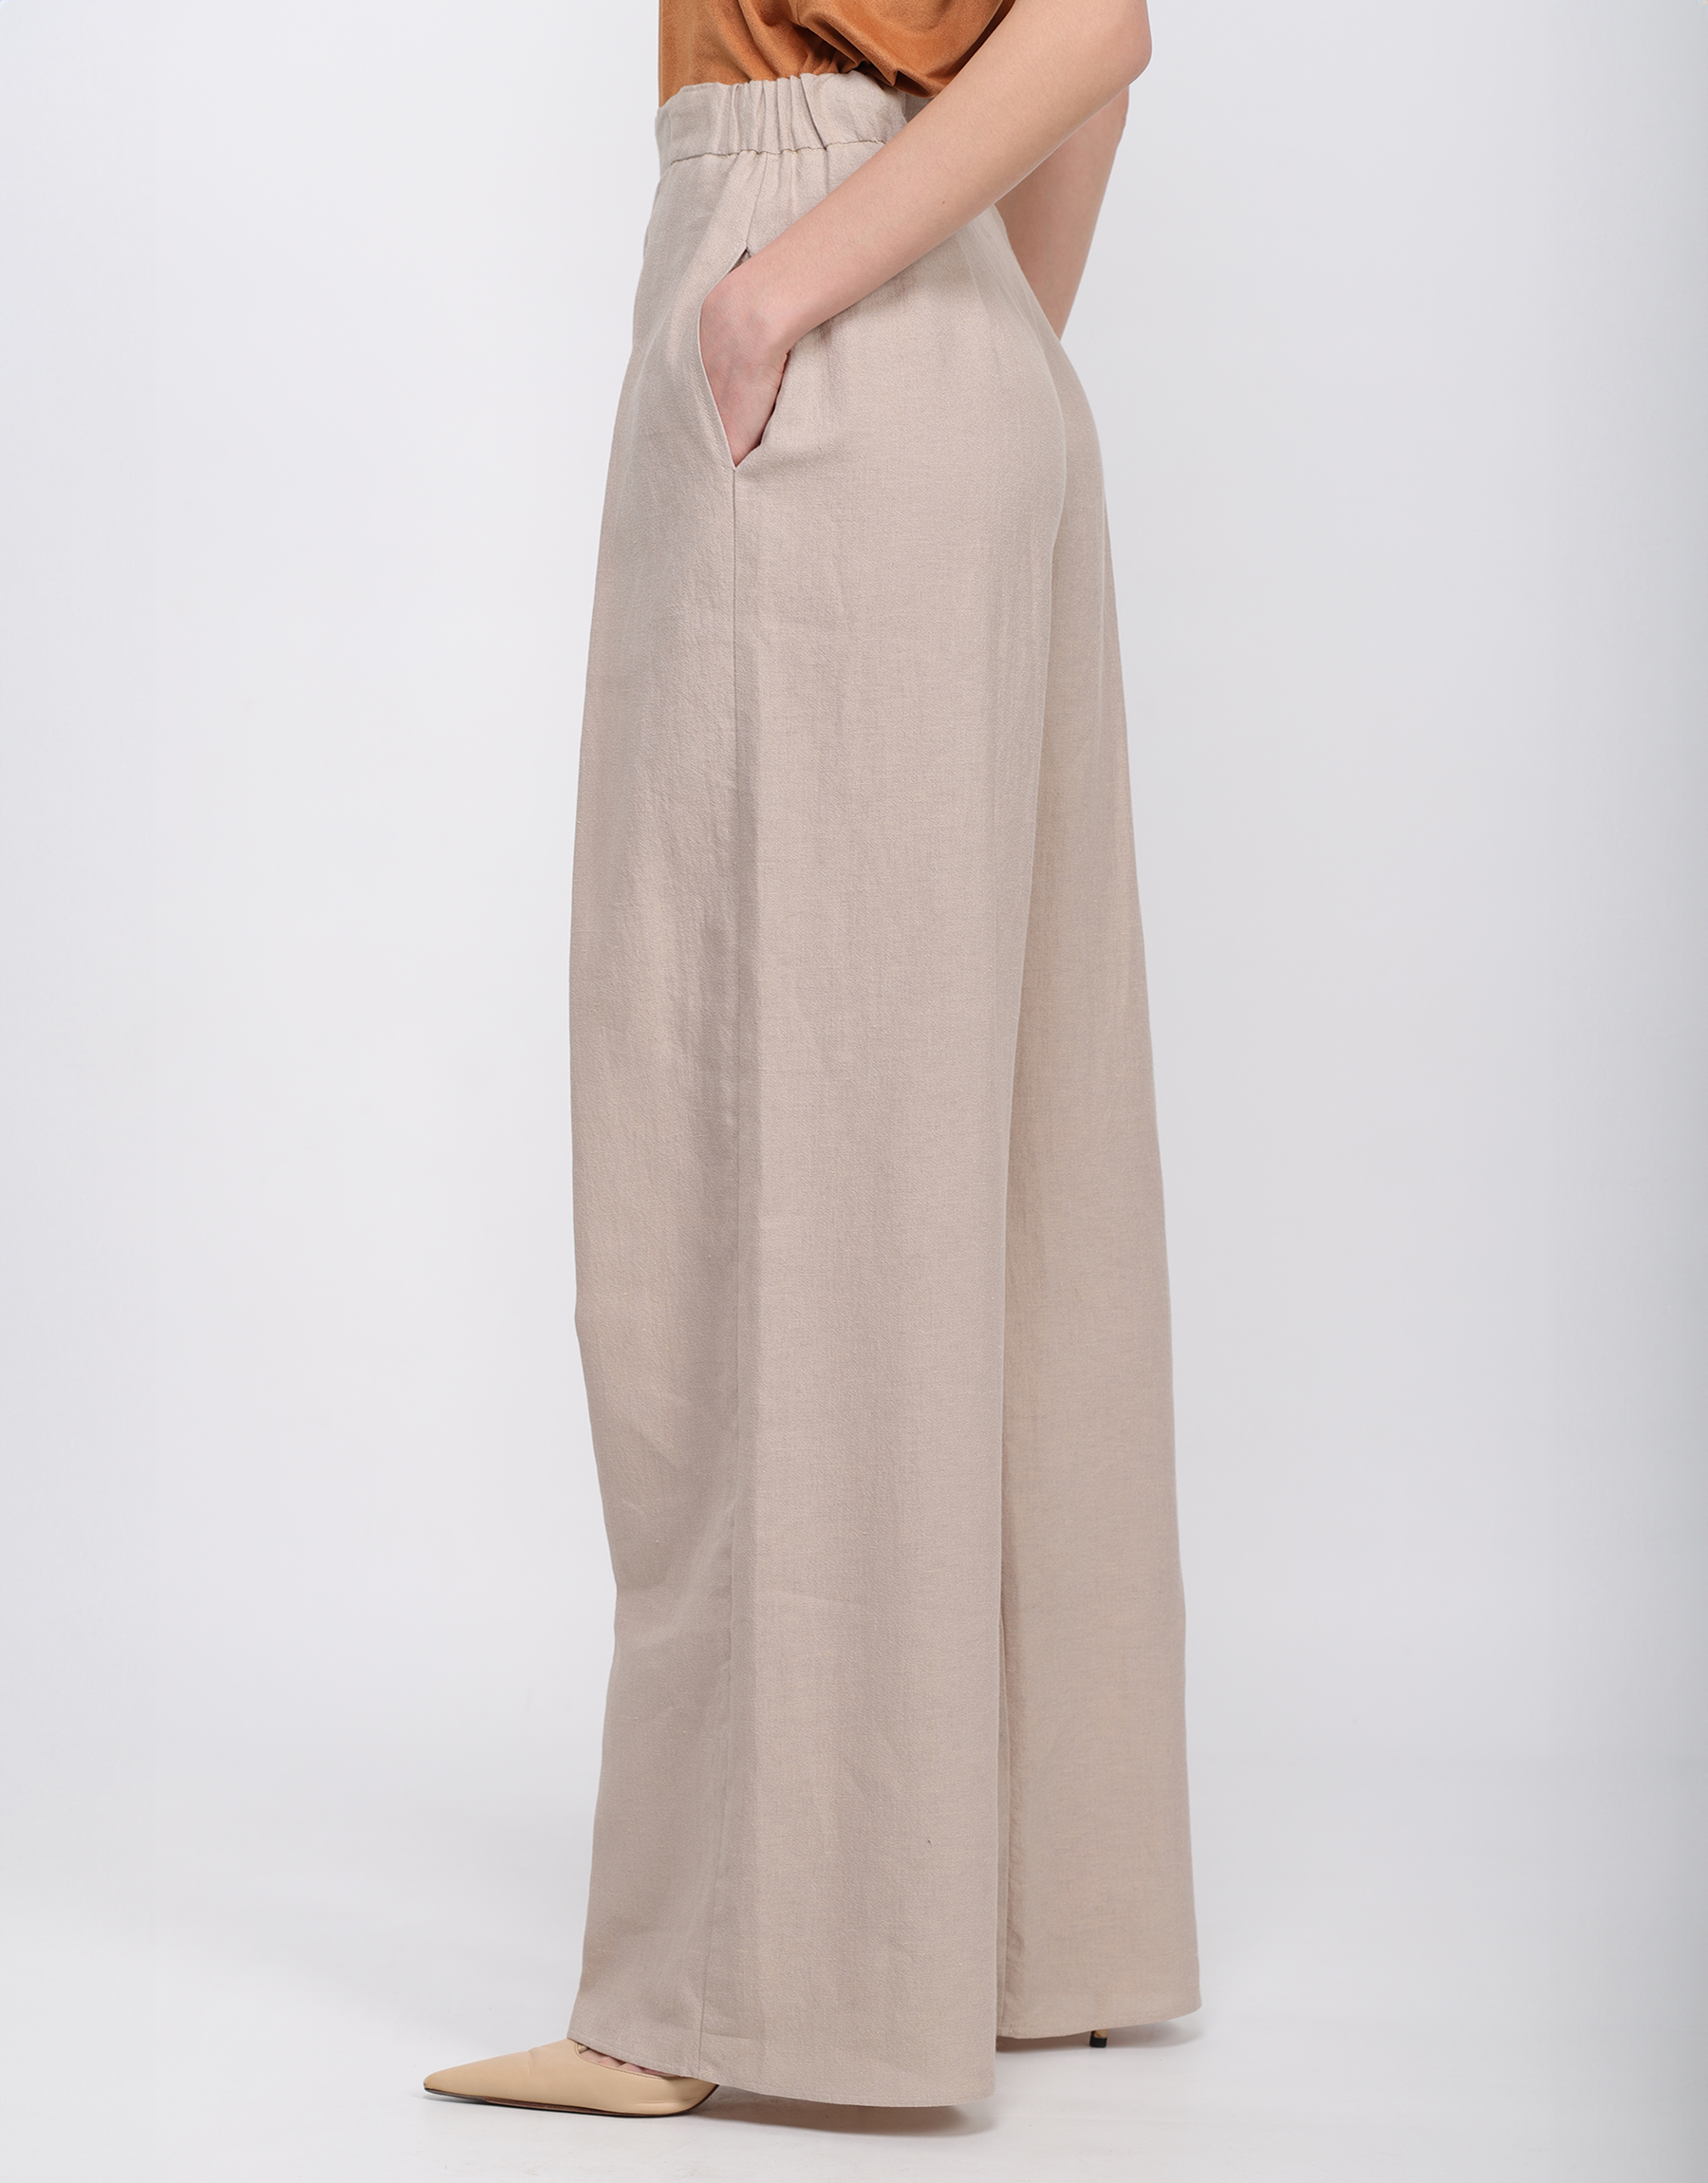 High-waisted pleated trousers in cotton and viscose putty